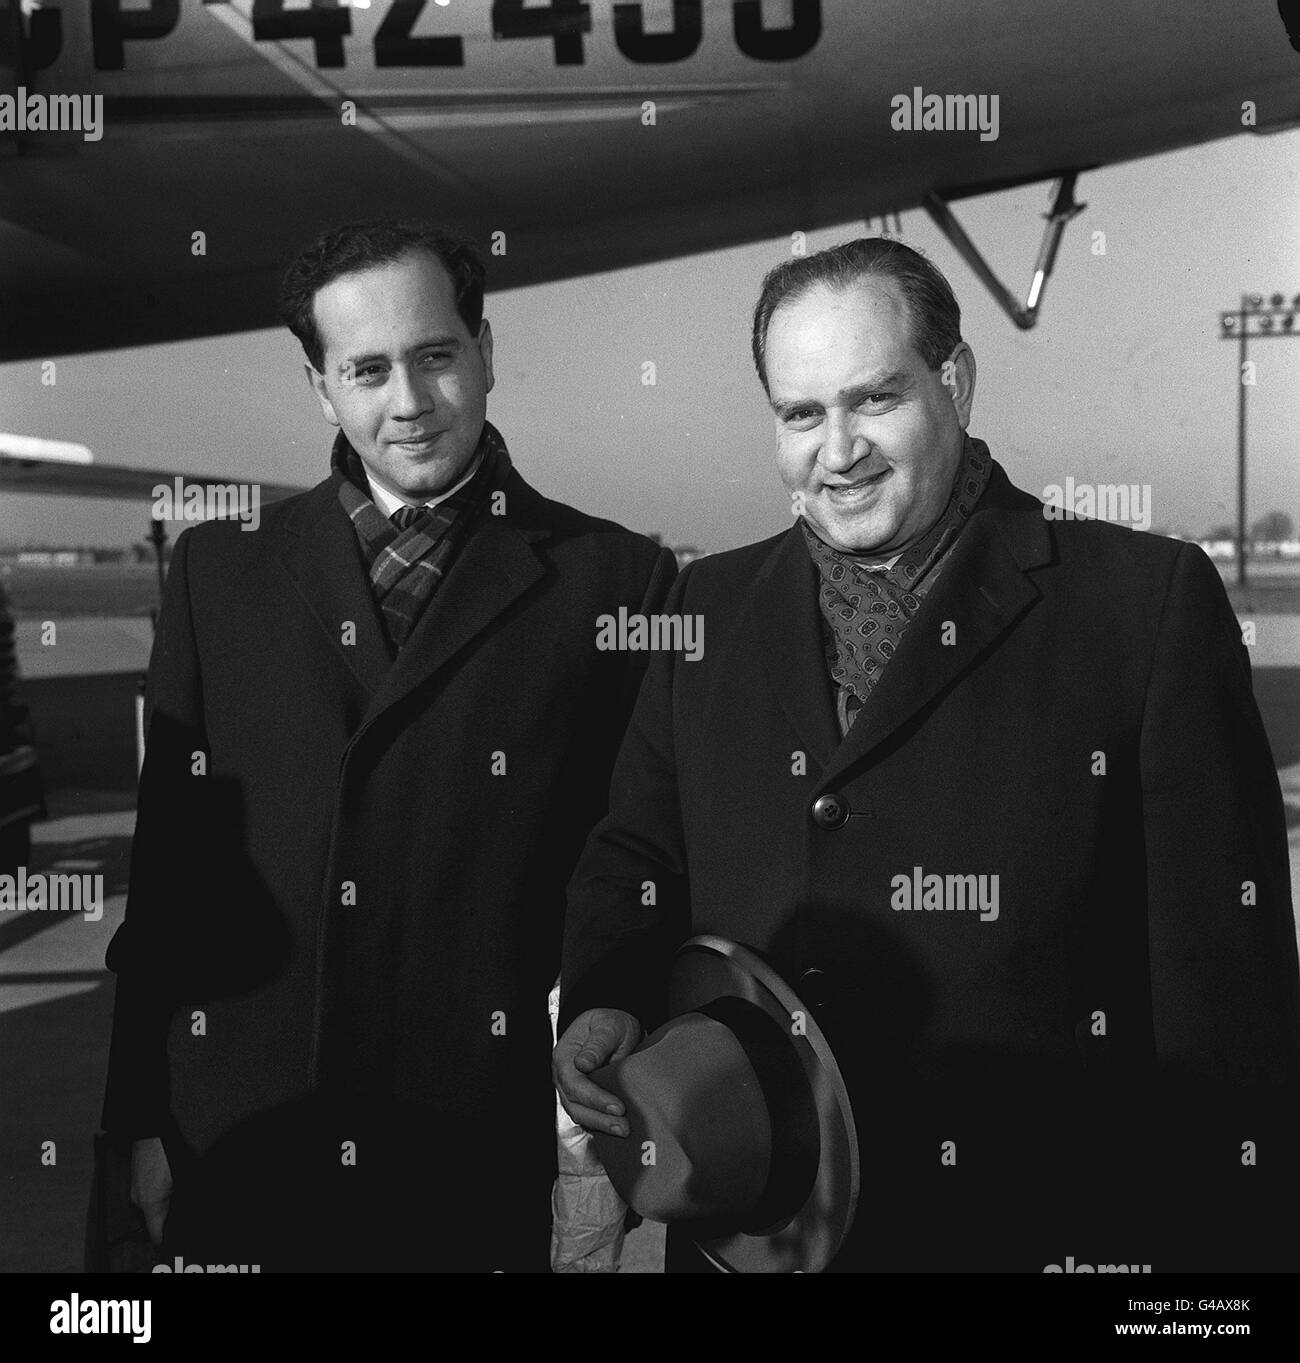 PA NEWS PHOTO 14/2/61 TWO OF THE WORLD'S GREATEST VIOLINISTS DAVID OISTRAKH AND HIS SON IGOR AT LONDON'S HEATHROW AIRPORT ARRIVING FROM MOSCOW TO MAKE THEIR FIRST JOINT APPEARANCE AT CONCERT OUTSIDE THE USSR Stock Photo